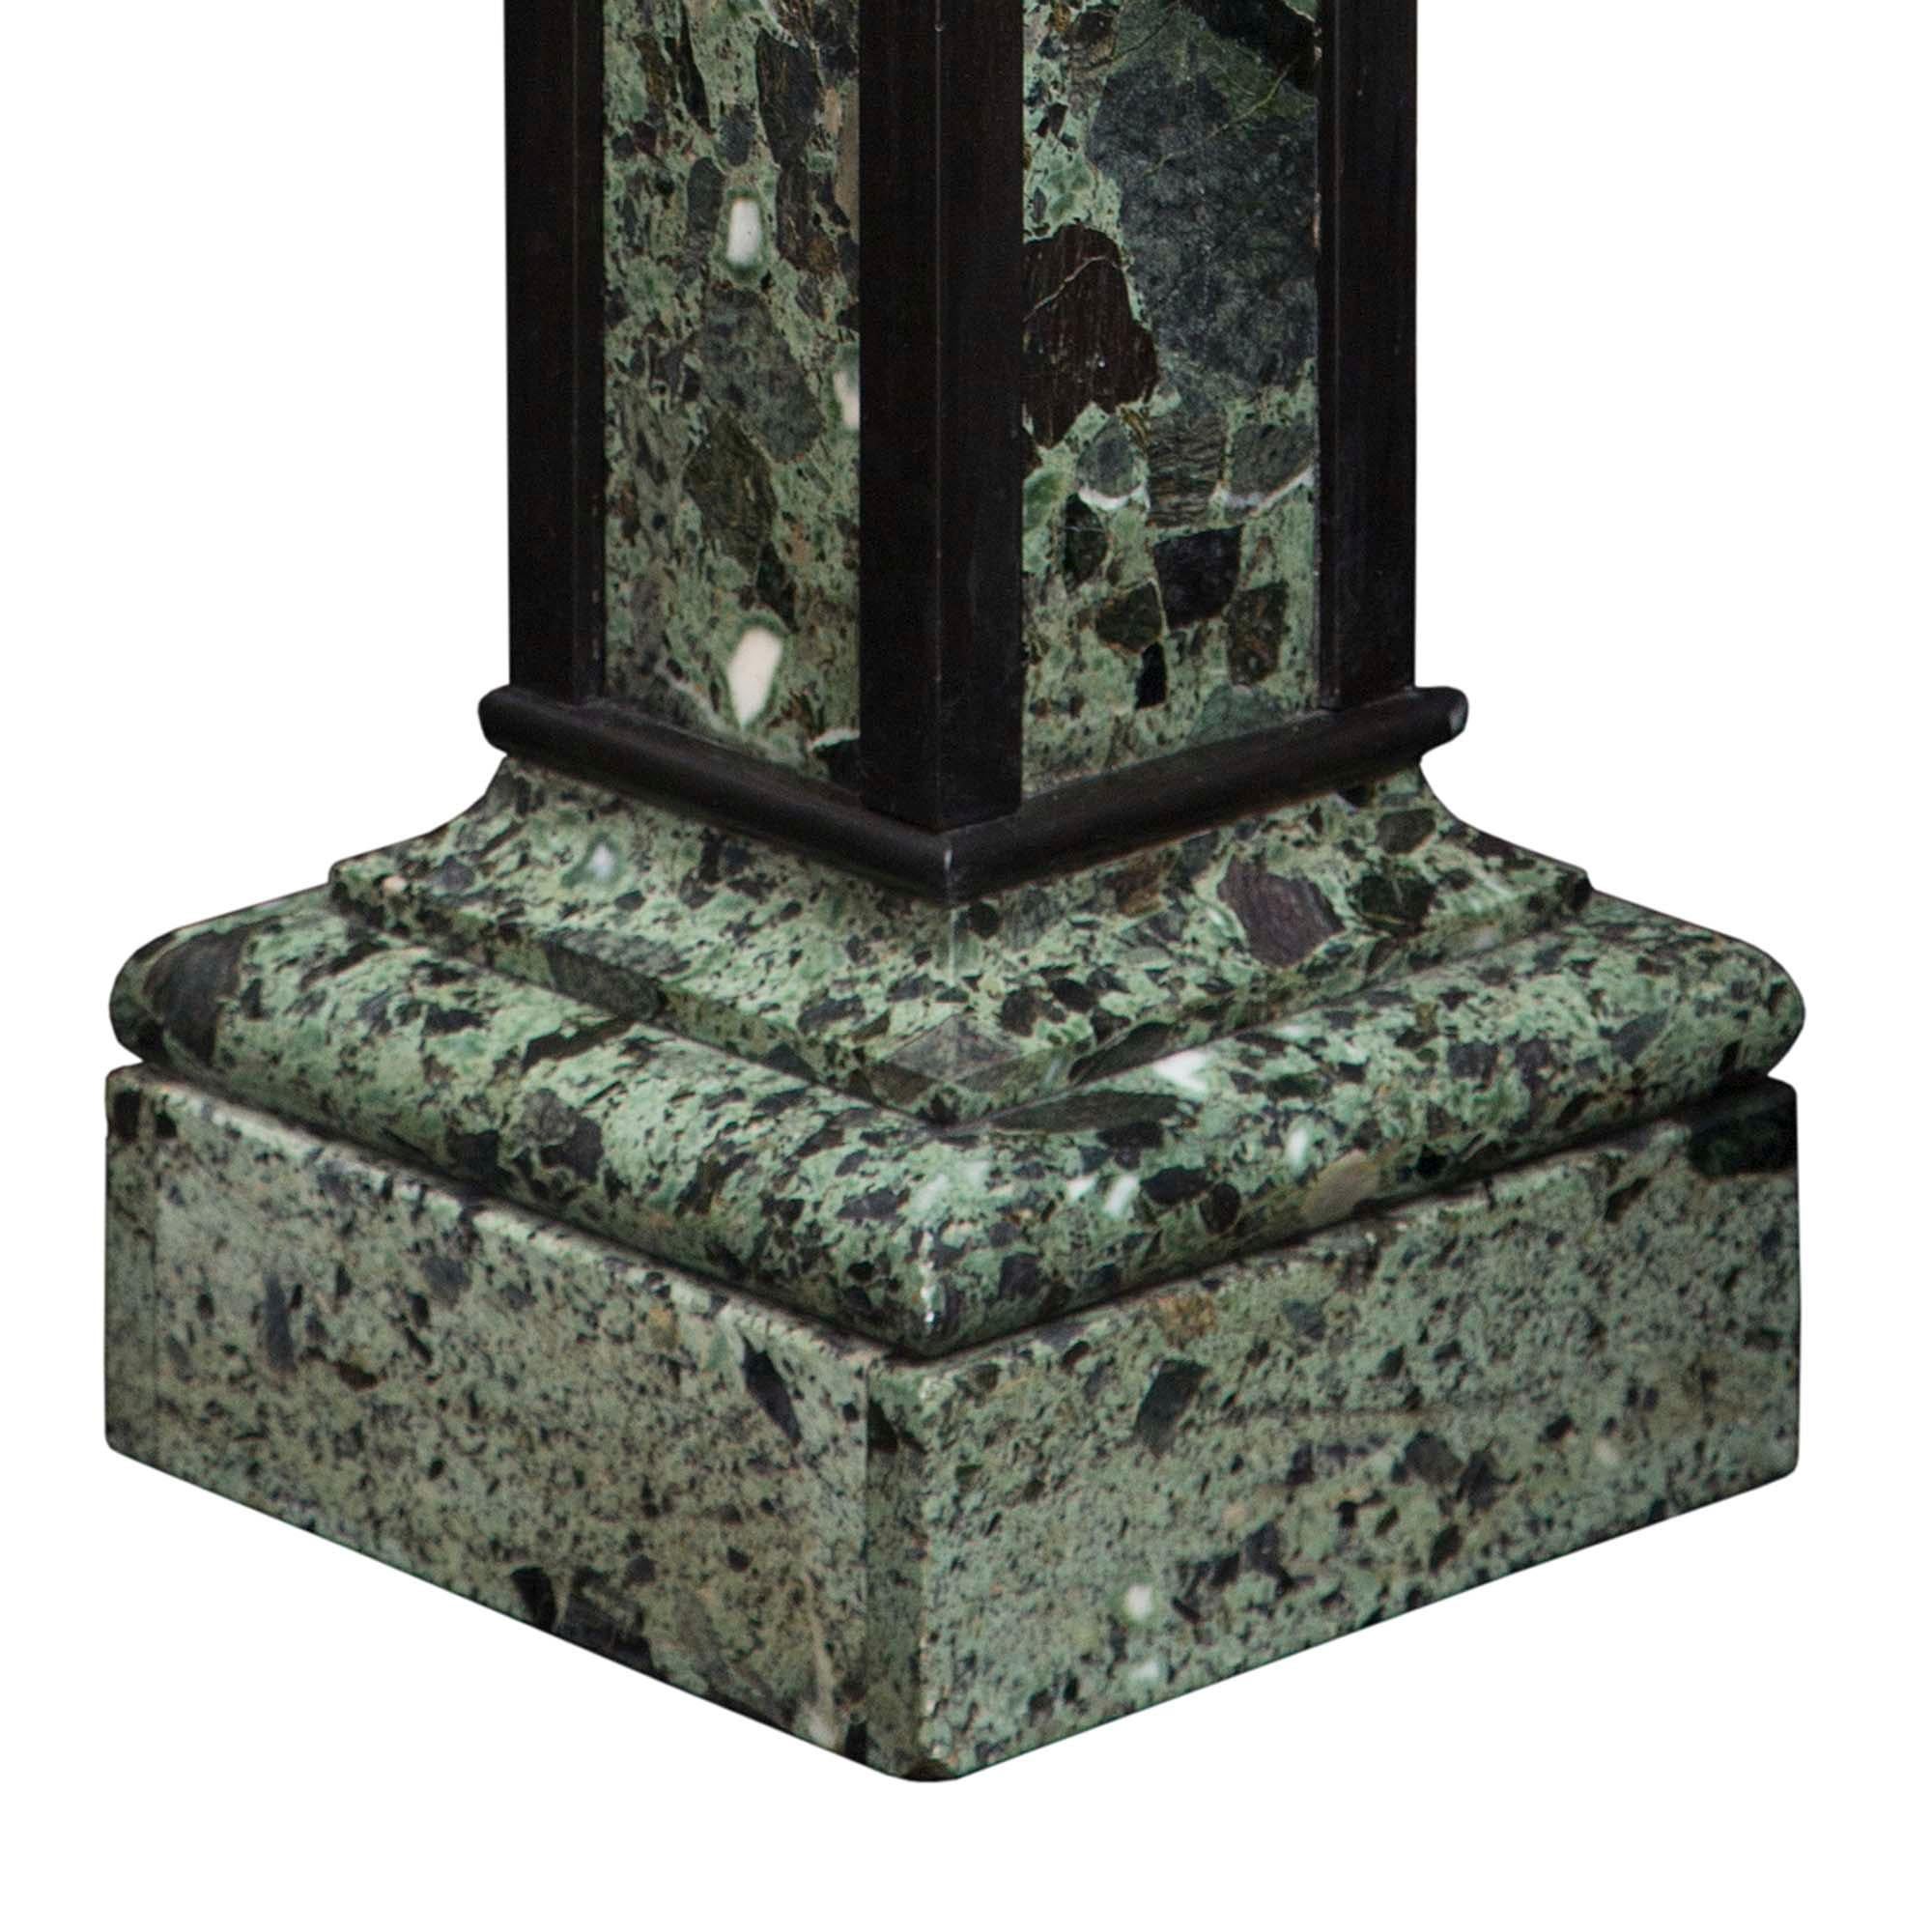 Italian 19th Century XVI Style Marble Pedestal with a Swivel Top In Good Condition For Sale In West Palm Beach, FL